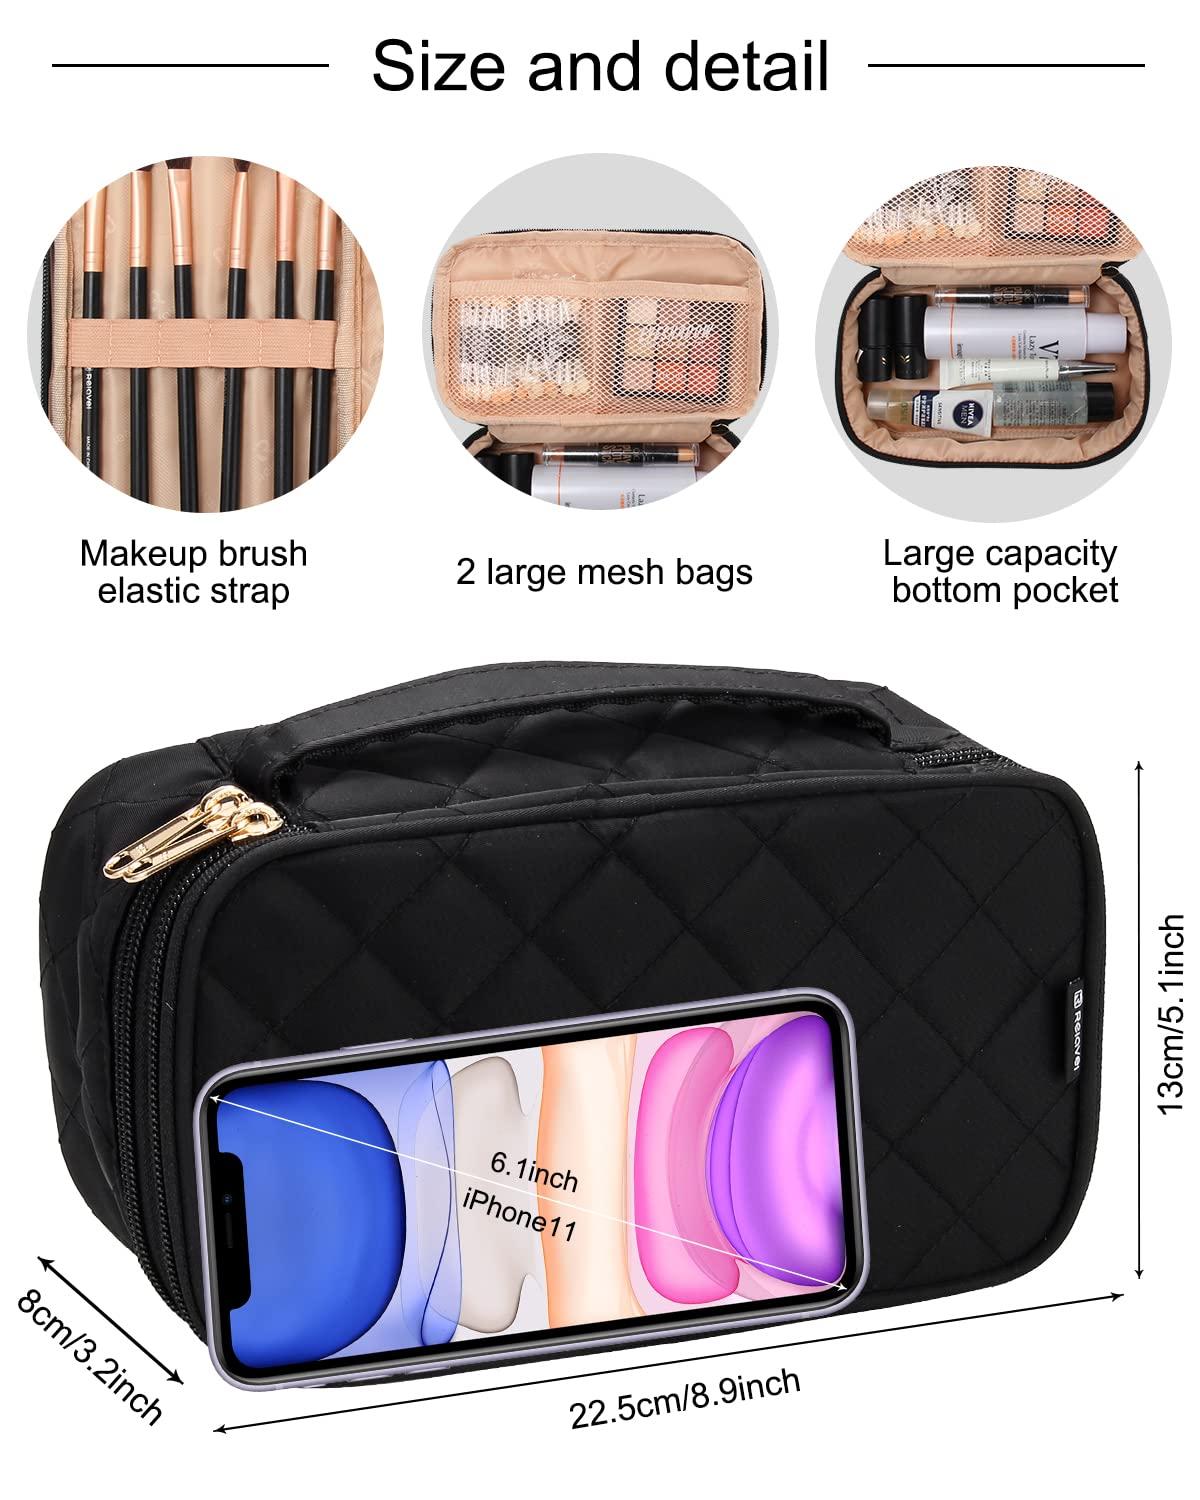 GetUSCart- Relavel Small Makeup Bag, Cosmetic Bag for Women 2 Layer Travel  Makeup Organizer Black Handbag Purse Pouch Compact Capacity for Daily Use,  Makeup Brush Holder, Waterproof Nylon (Brown)